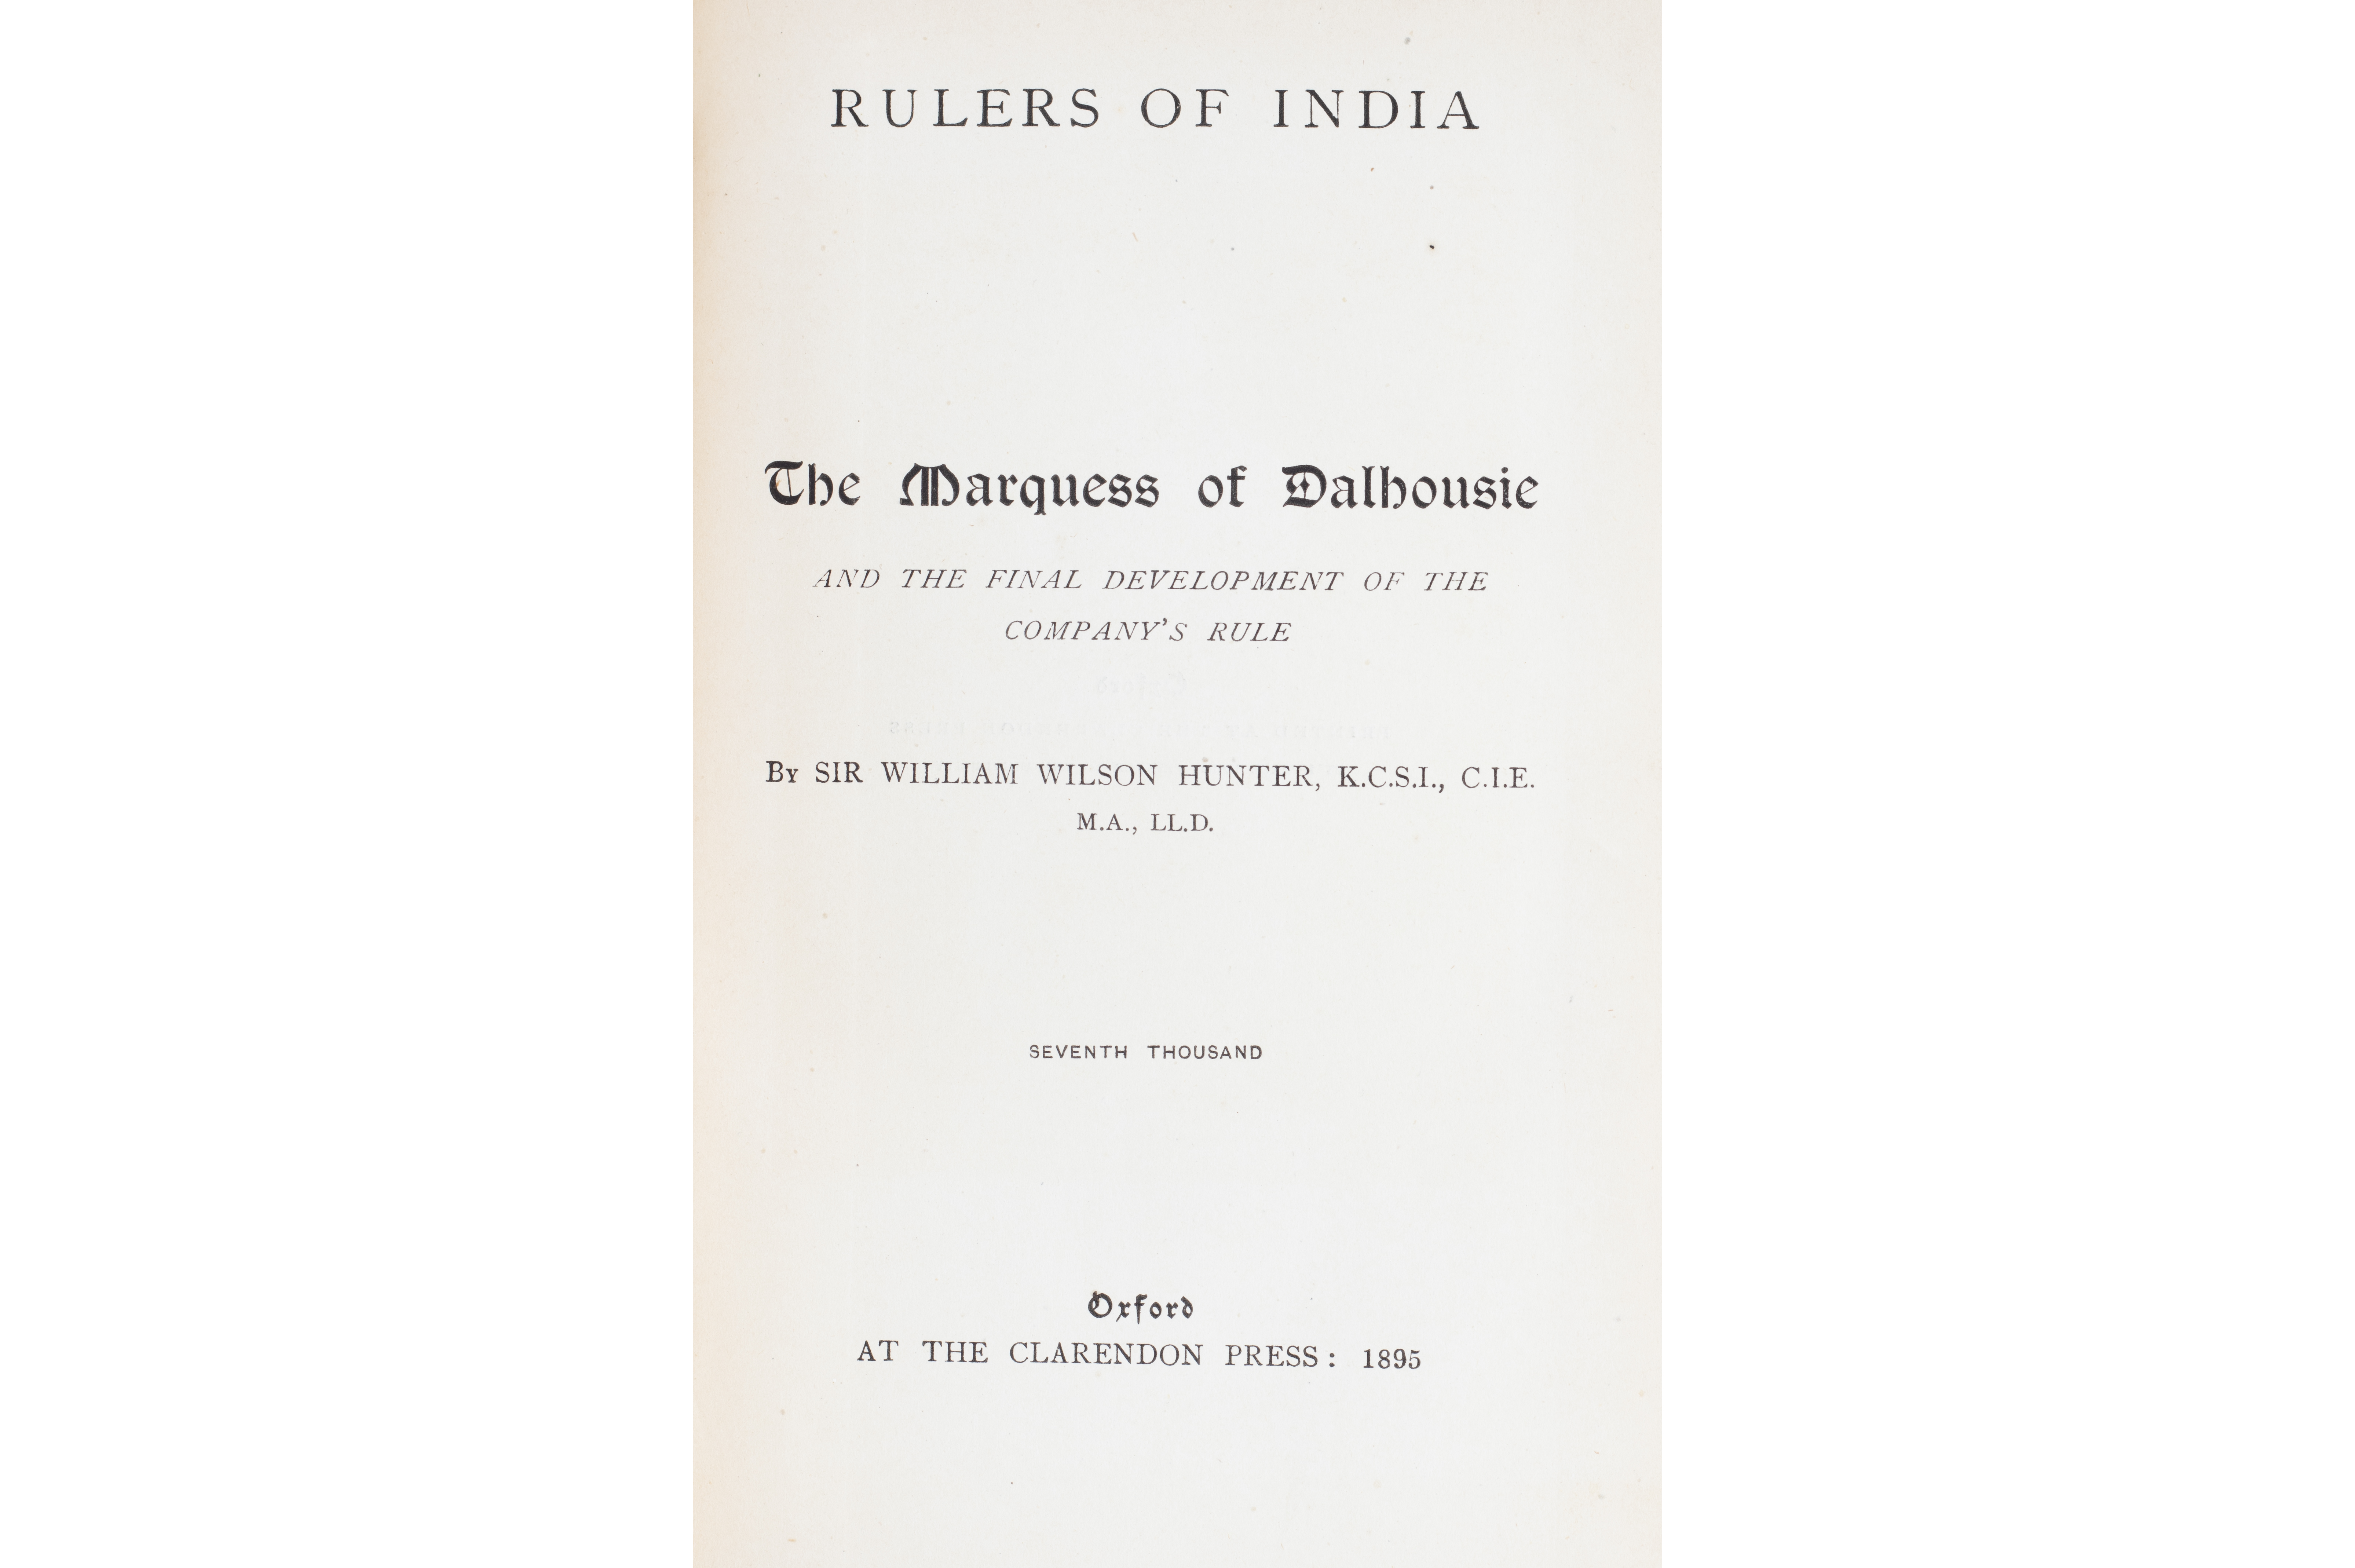 VARIOUS AUTHORS - 'RULERS OF INDIA' - Image 4 of 19